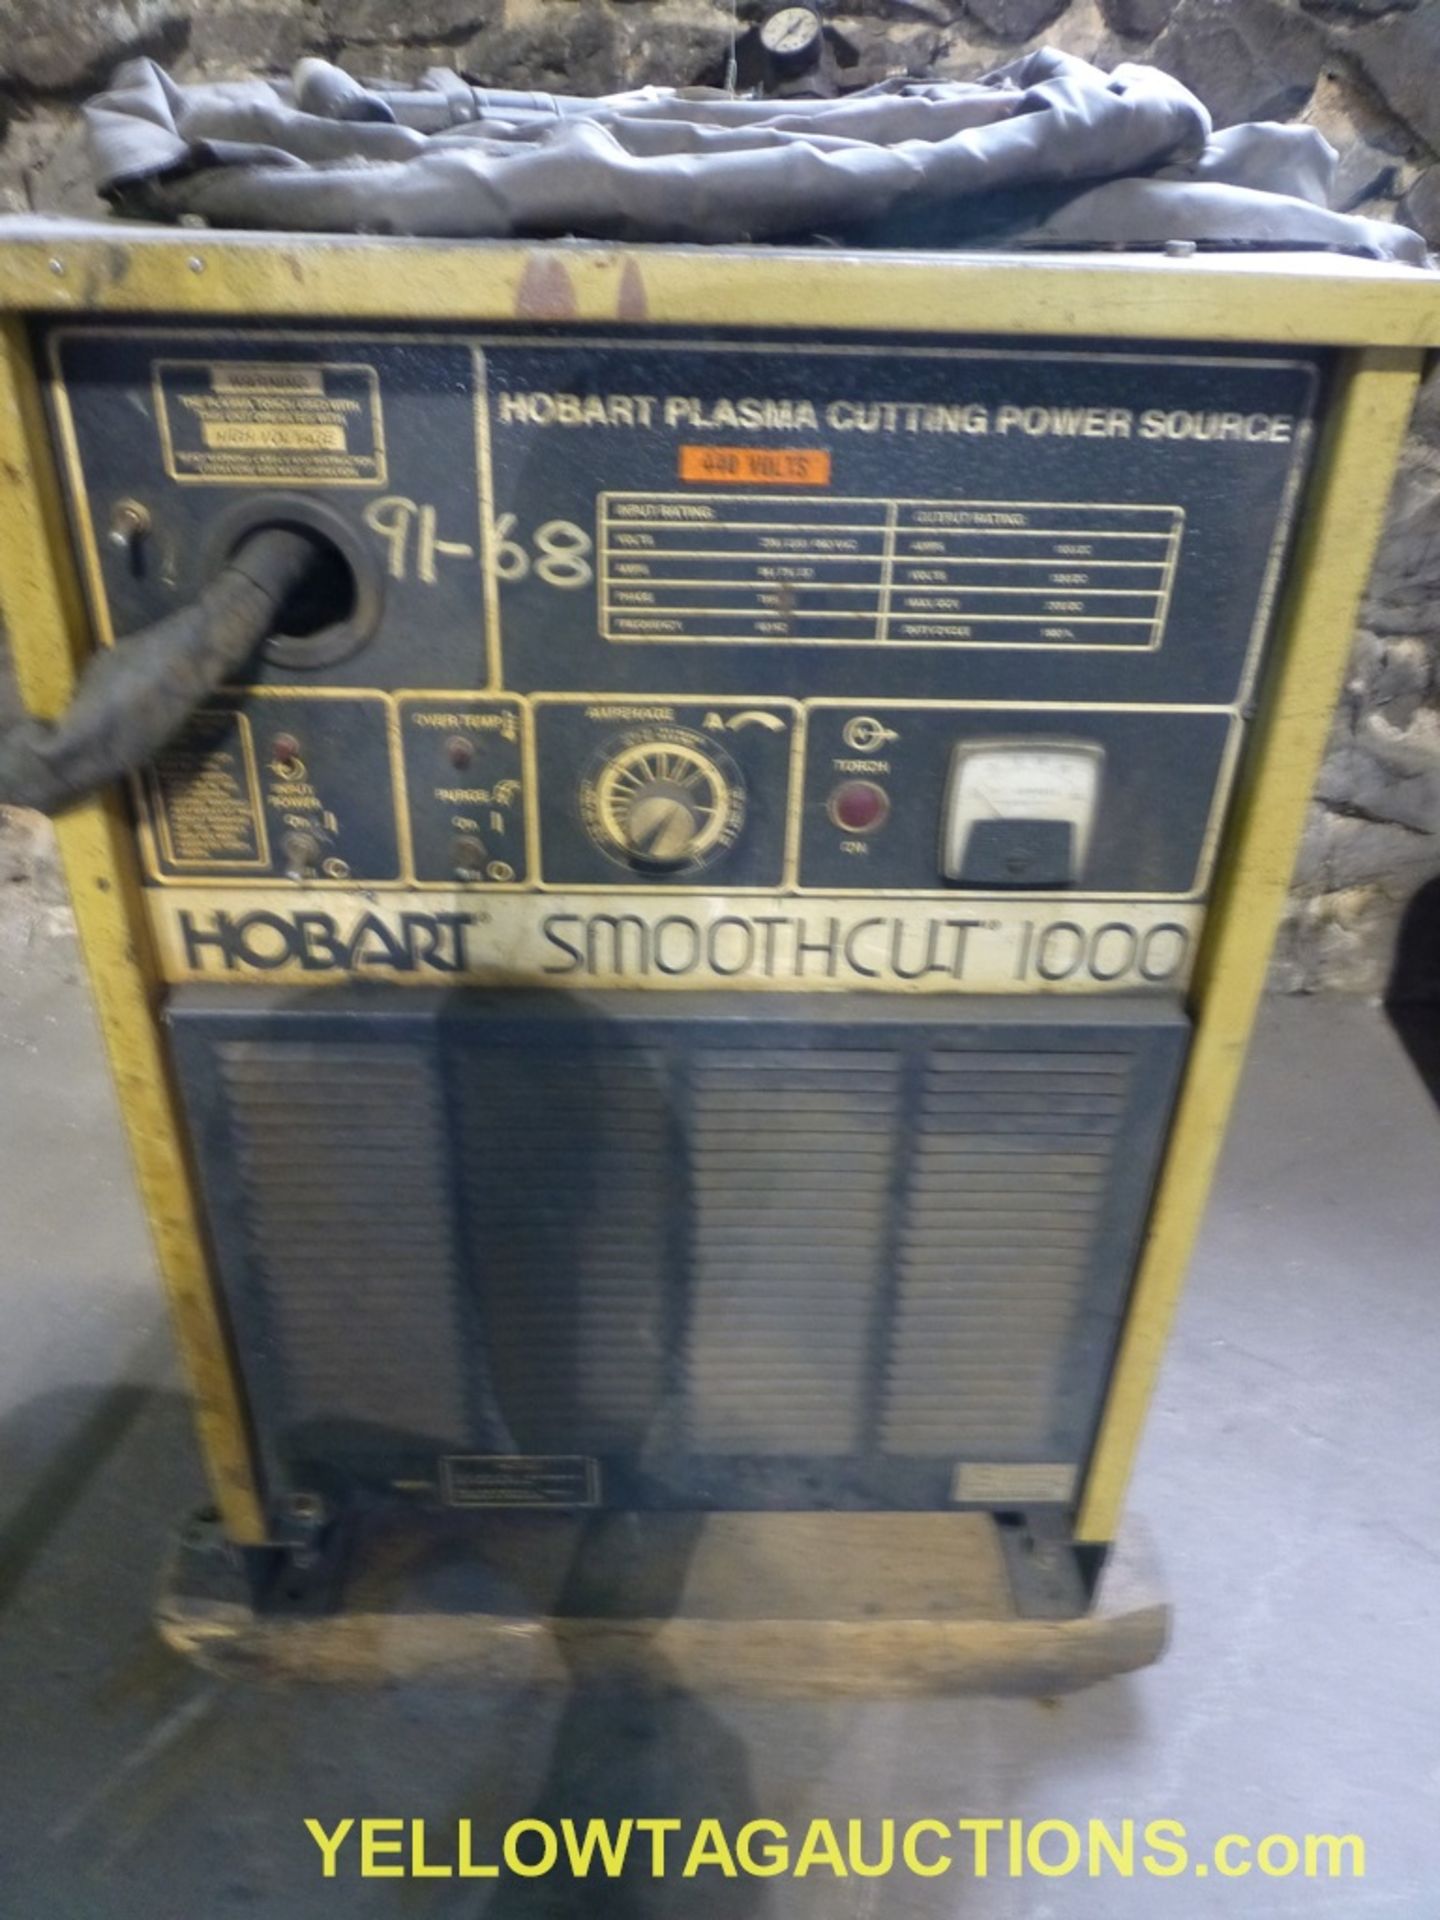 Hobart Plasma Cutting Power Source Smooth Cut 1000 | Stock No. 500101-1; 84-37A; 206-460 VAC - Image 2 of 10